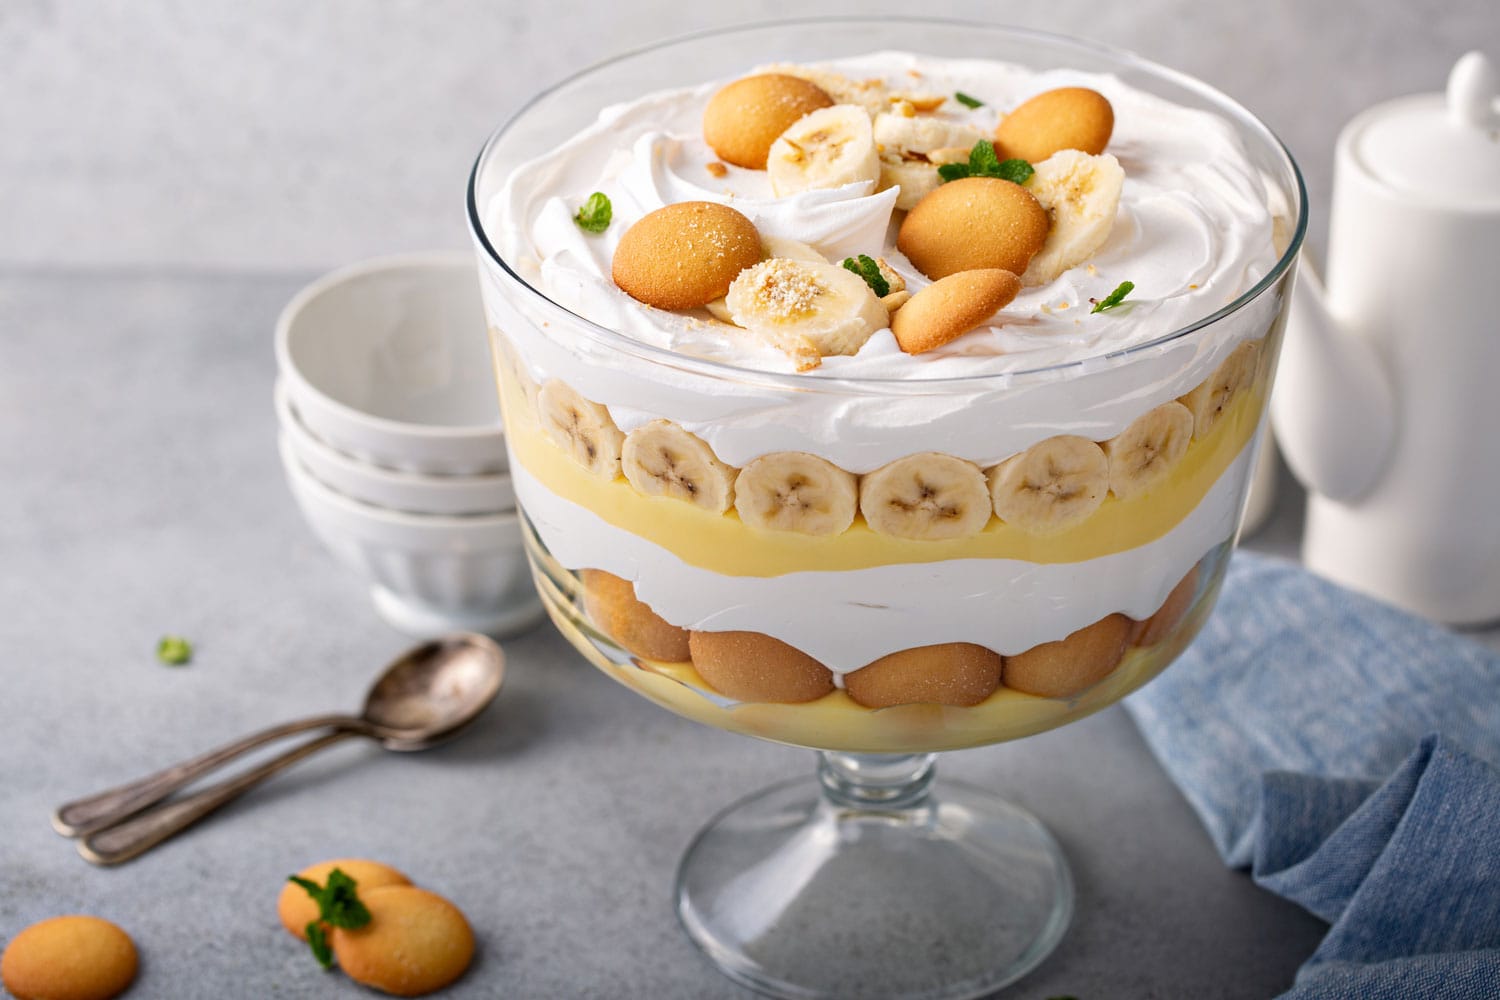 Banana pudding and its delicious topping of a cookie bread